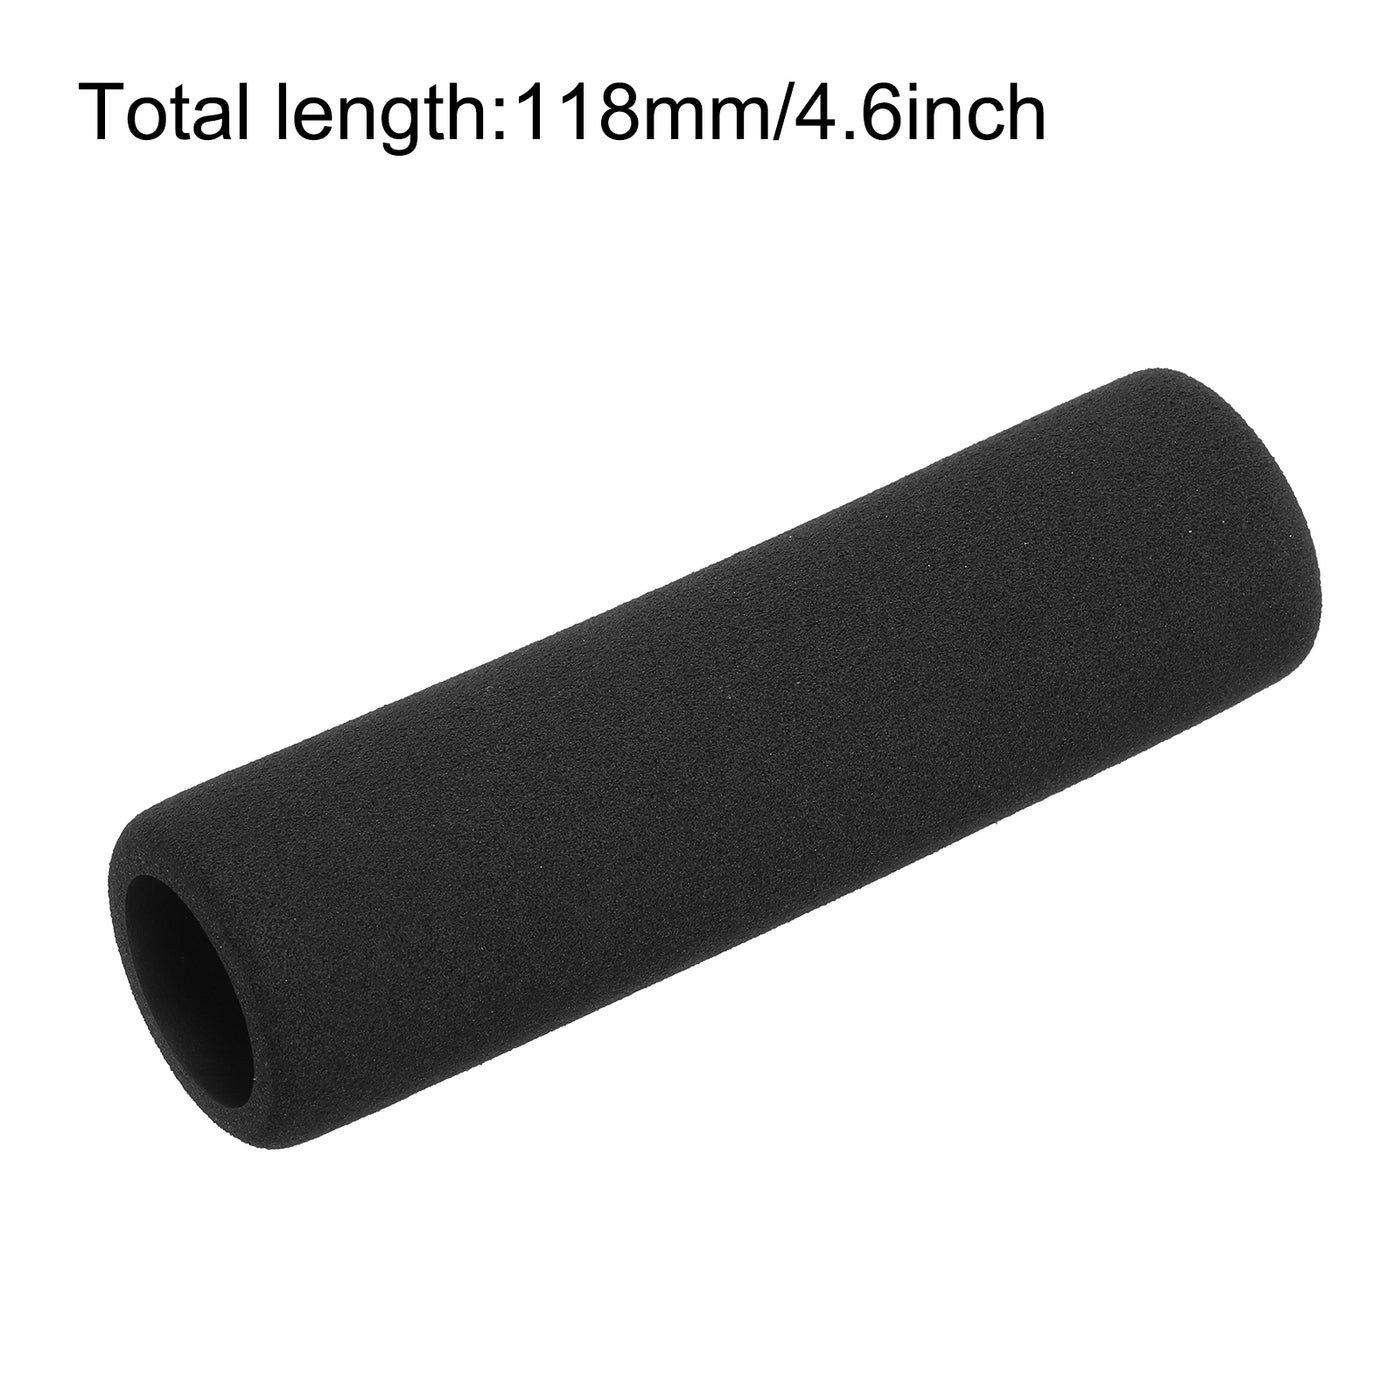 uxcell Uxcell Pipe Insulation Tube Foam Tubing for Handle Grip Support 21mm ID 31mm OD 118mm Heat Preservation Black